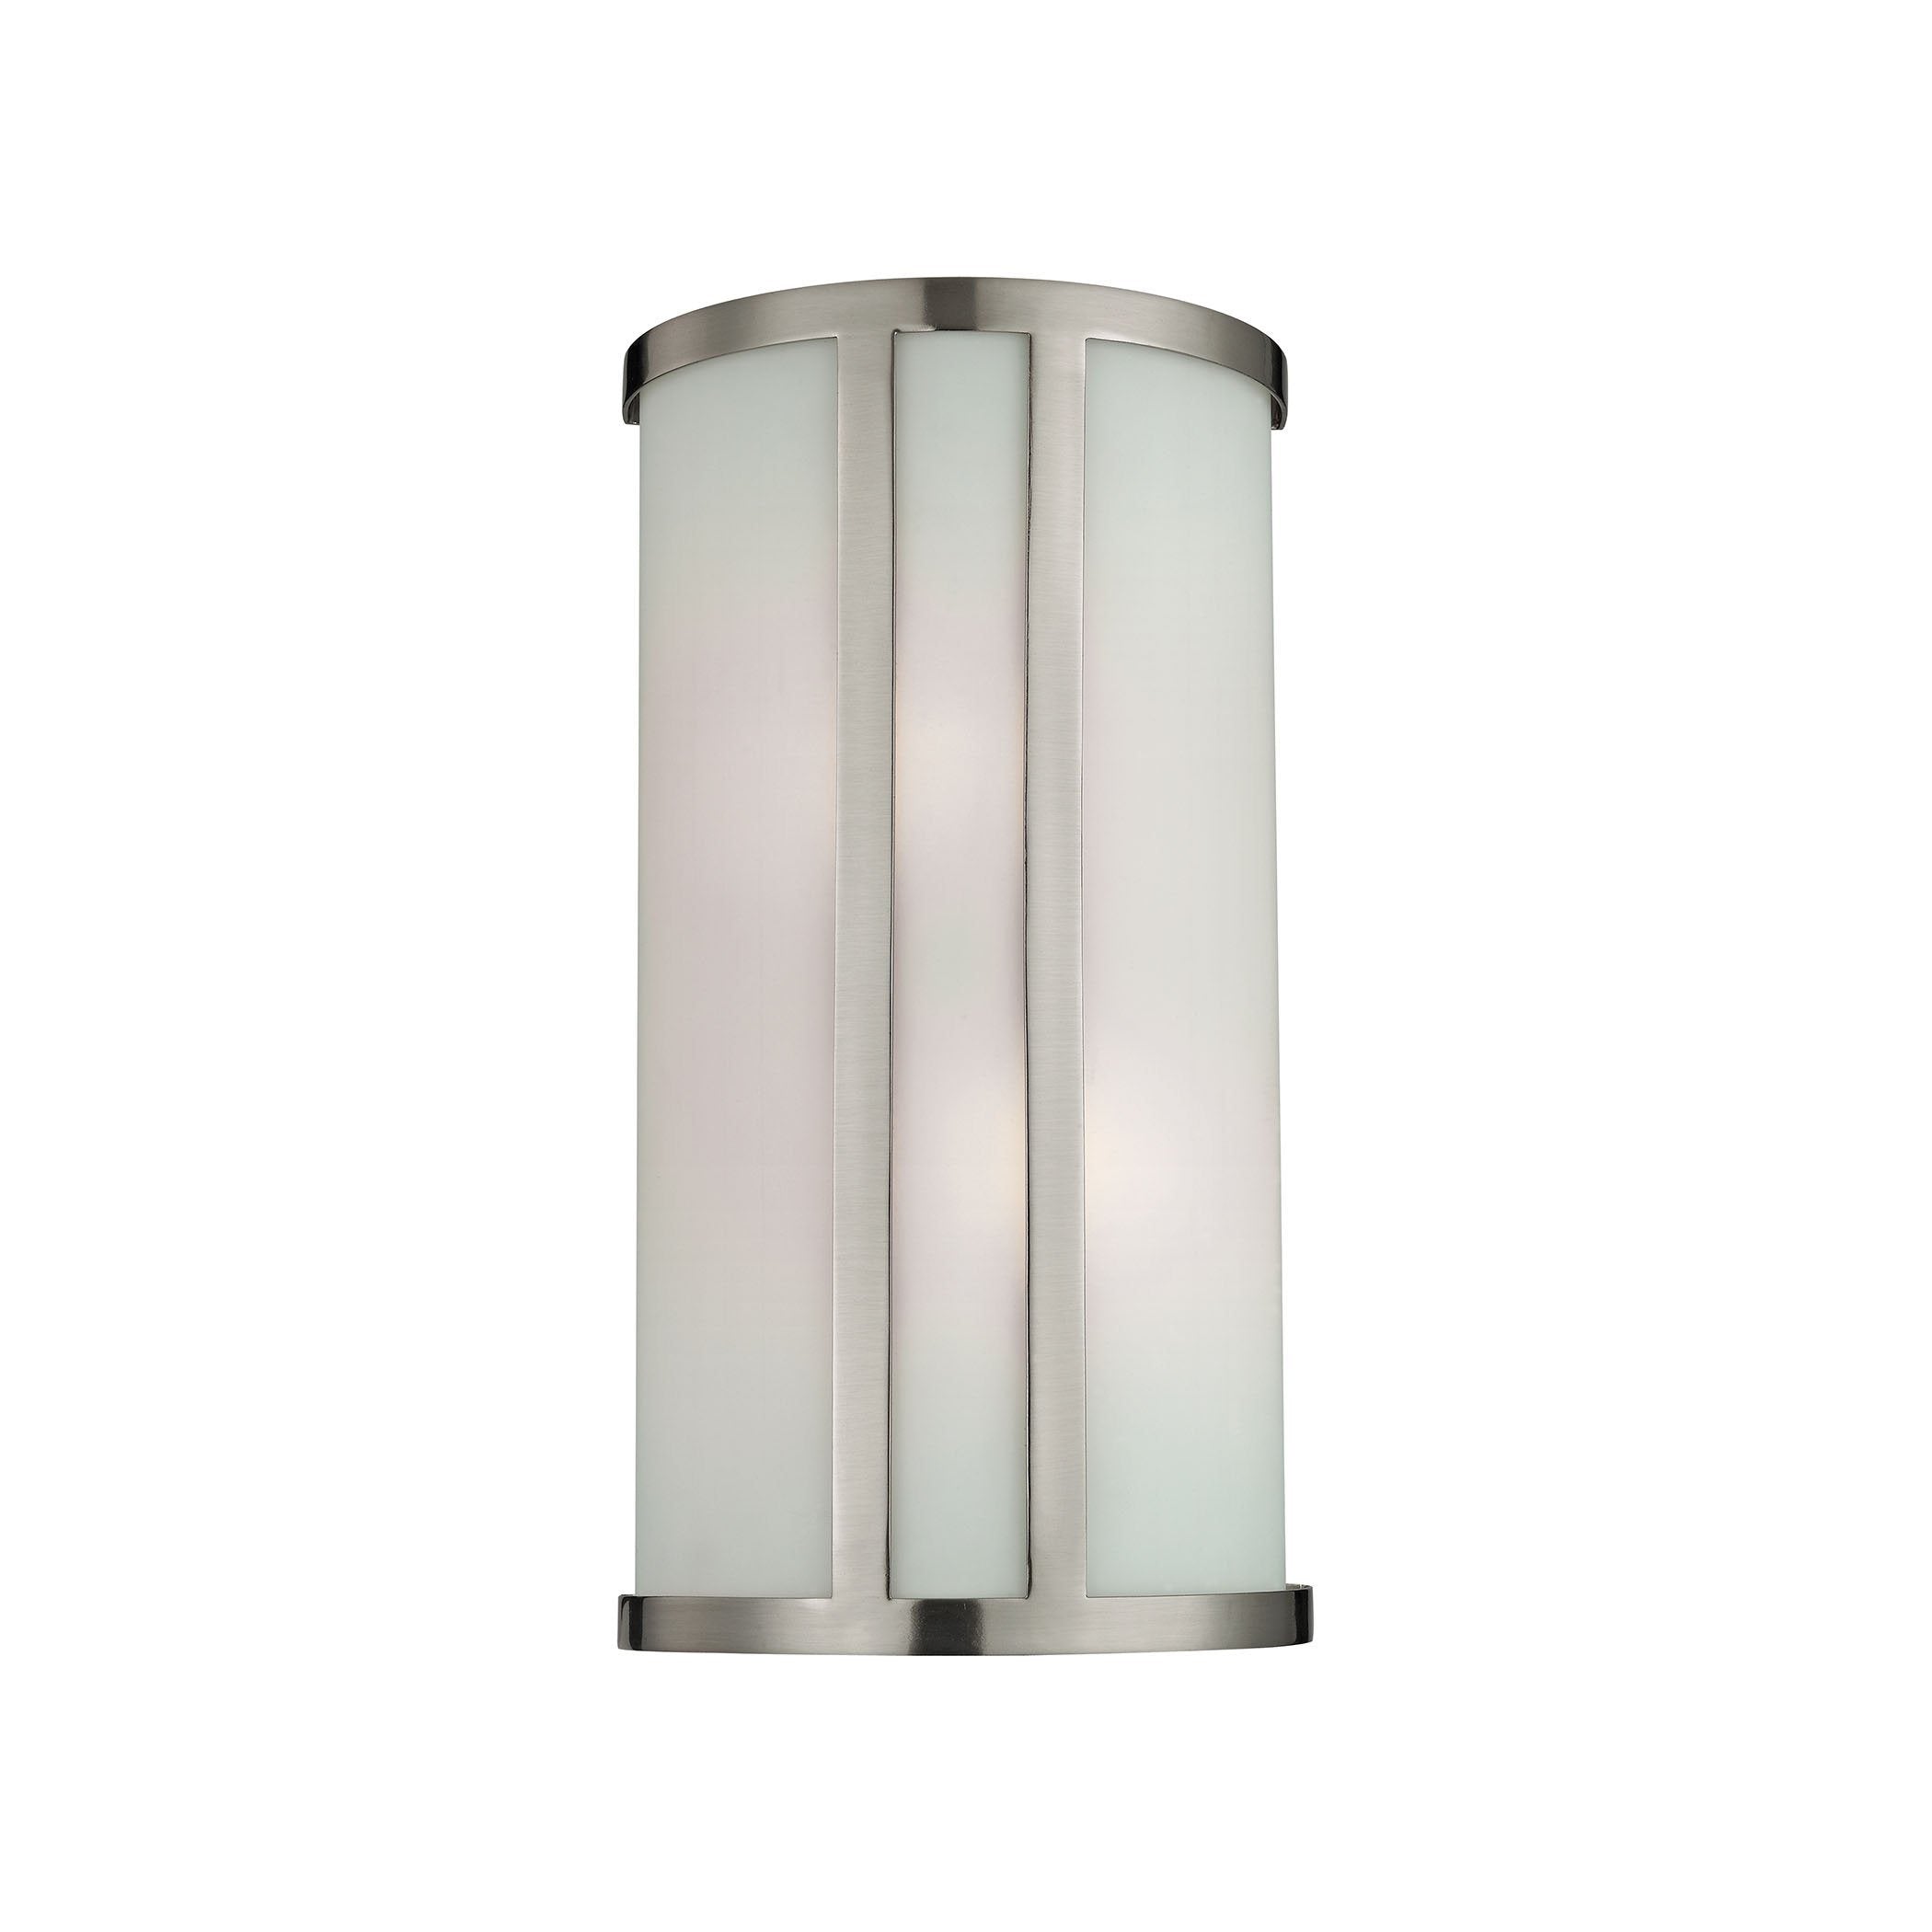 14"h Wall Sconce in Brushed Nickel Wall Thomas Lighting 